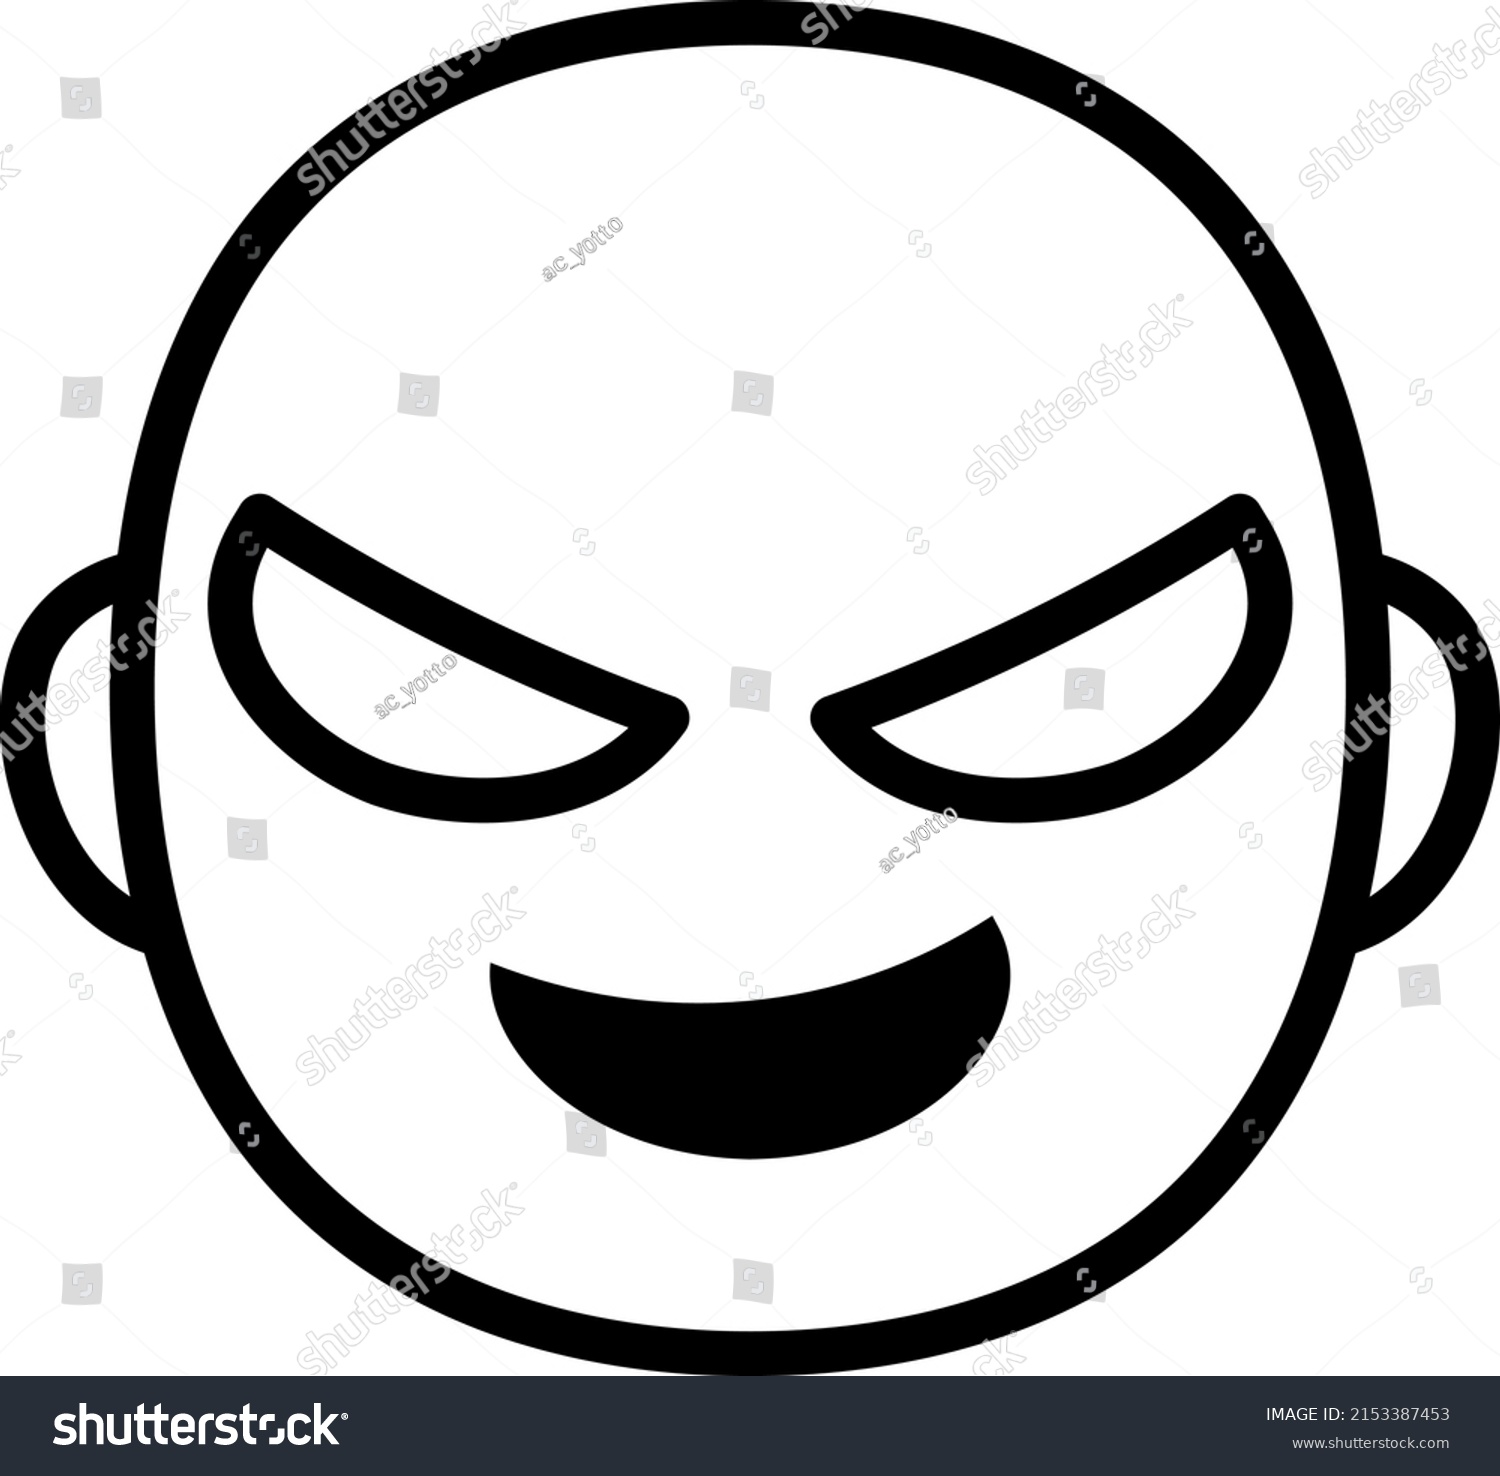 SVG of Bad guy face isolated vector illustration. svg